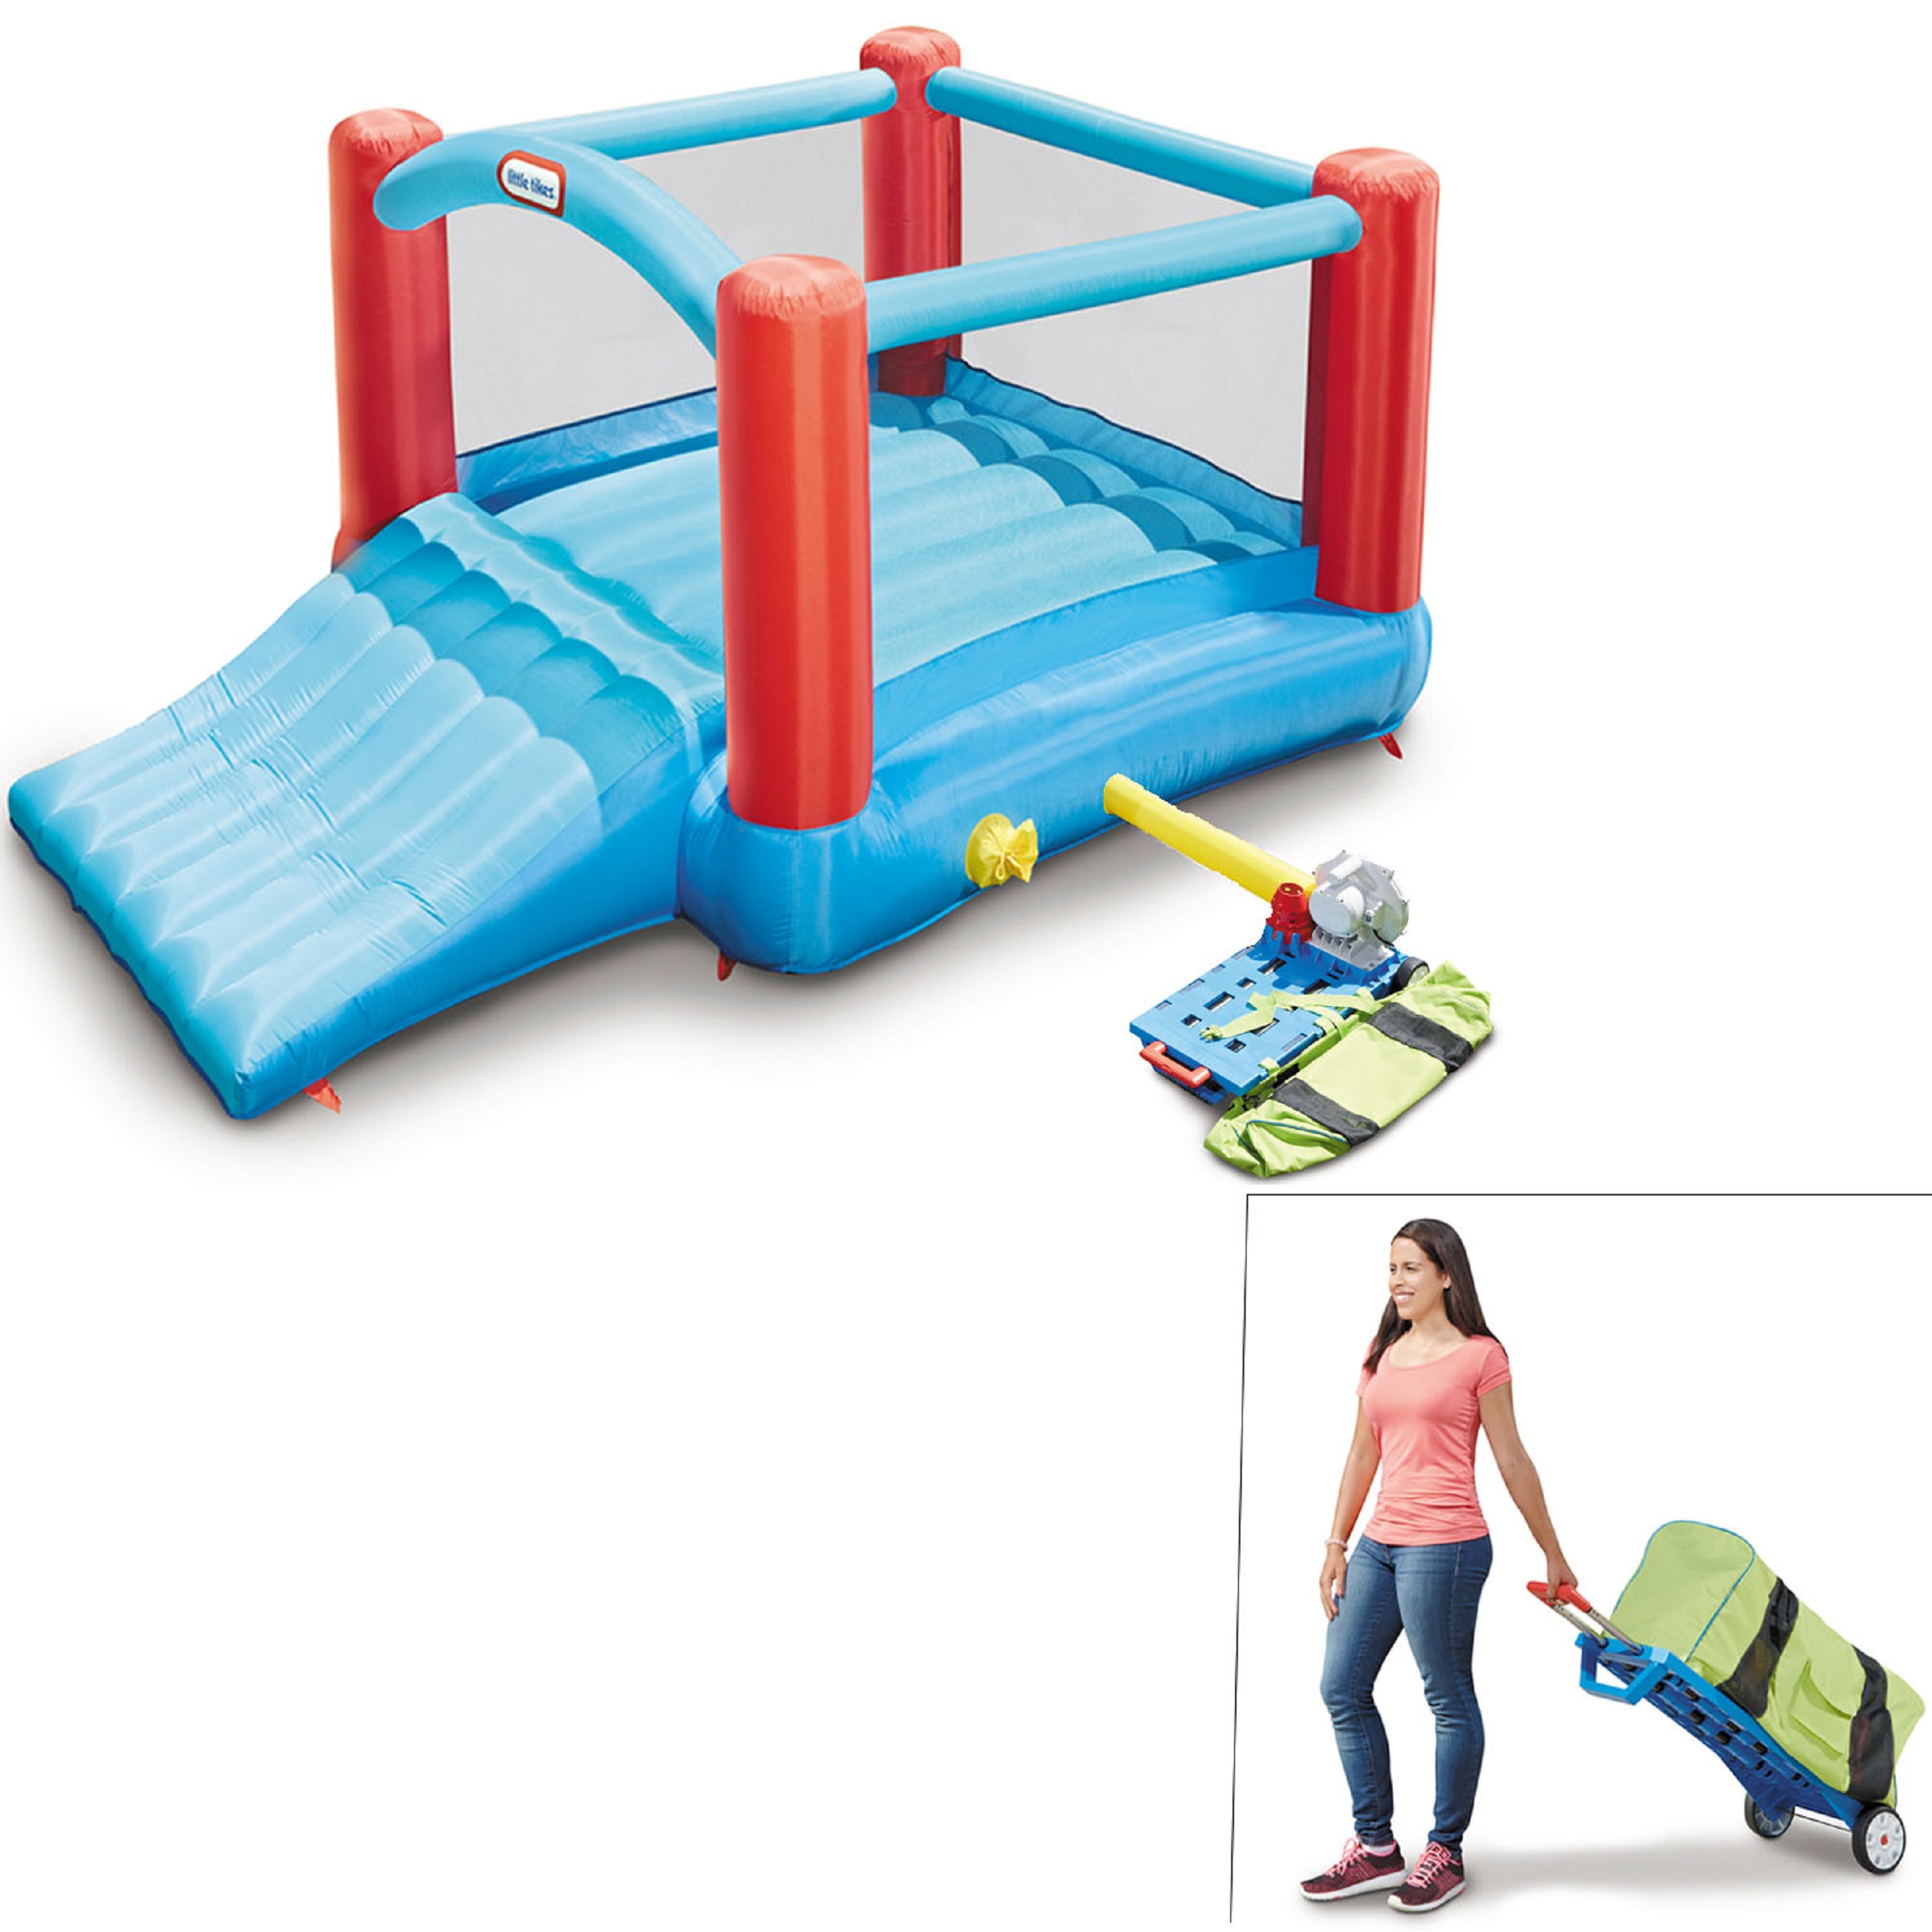 Little Tikes Pack 'n Roll 7'x7' Inflatable Bounce House with Slide, Blower and Wheeled Carry Case, Multicolor- Indoor Outdoor Toy Kids Girls Boys Ages 3 4 5+ - image 1 of 5